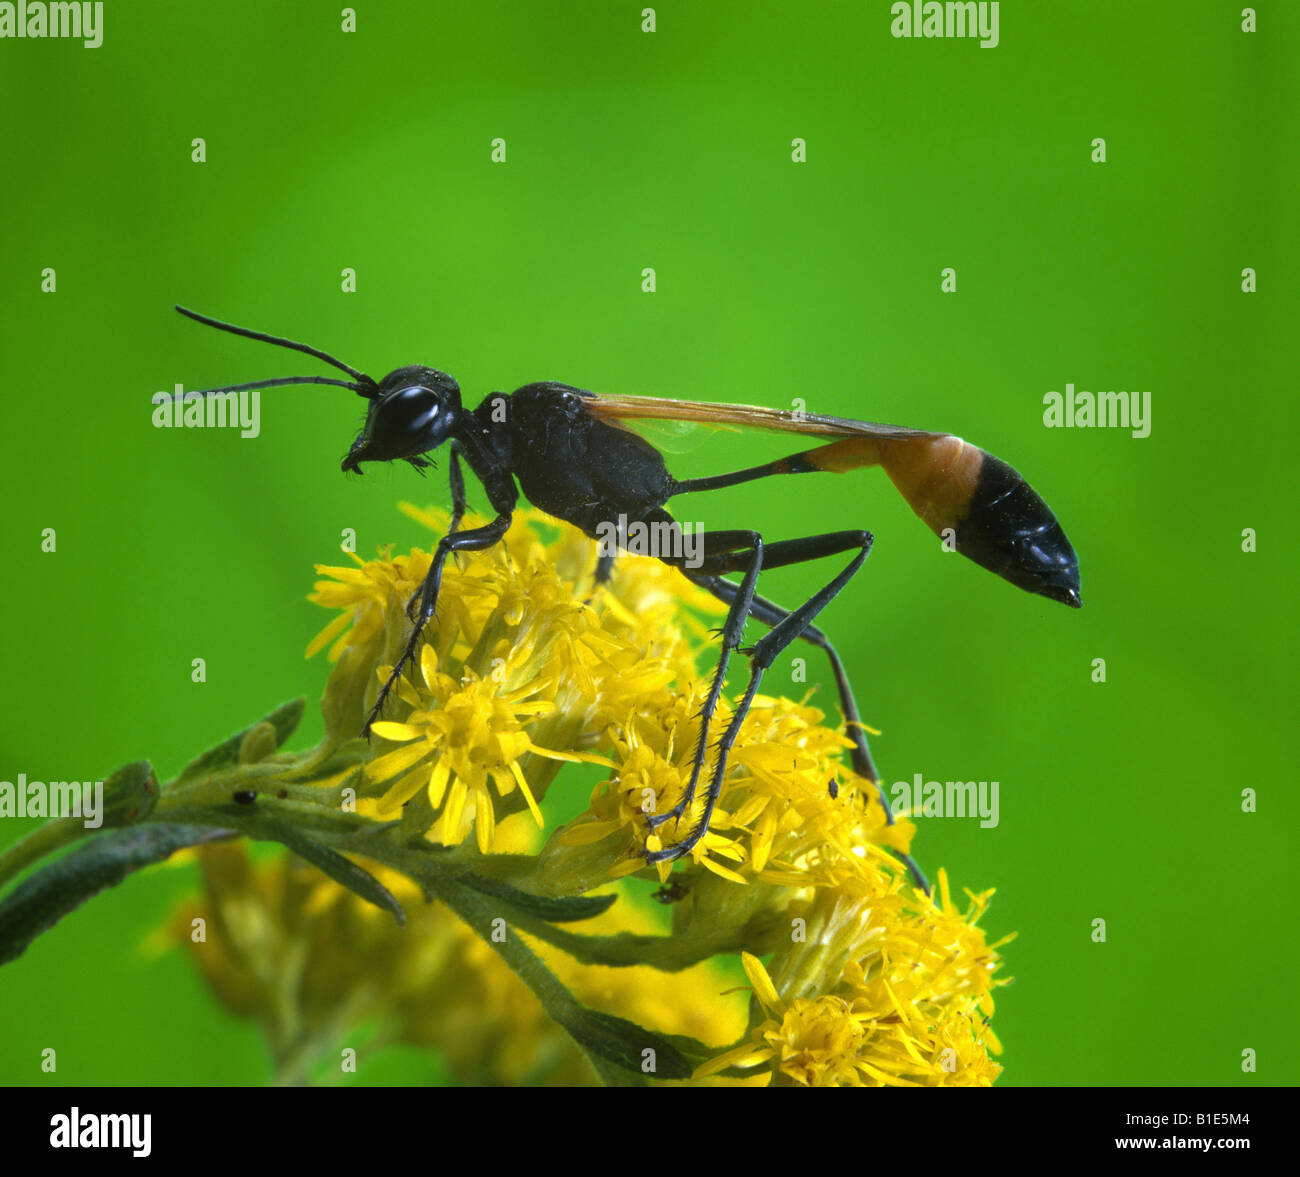 THREAD WAISTED WASP SPHEX PROCERUS ADULT WASP ON FLOWER Stock Photo